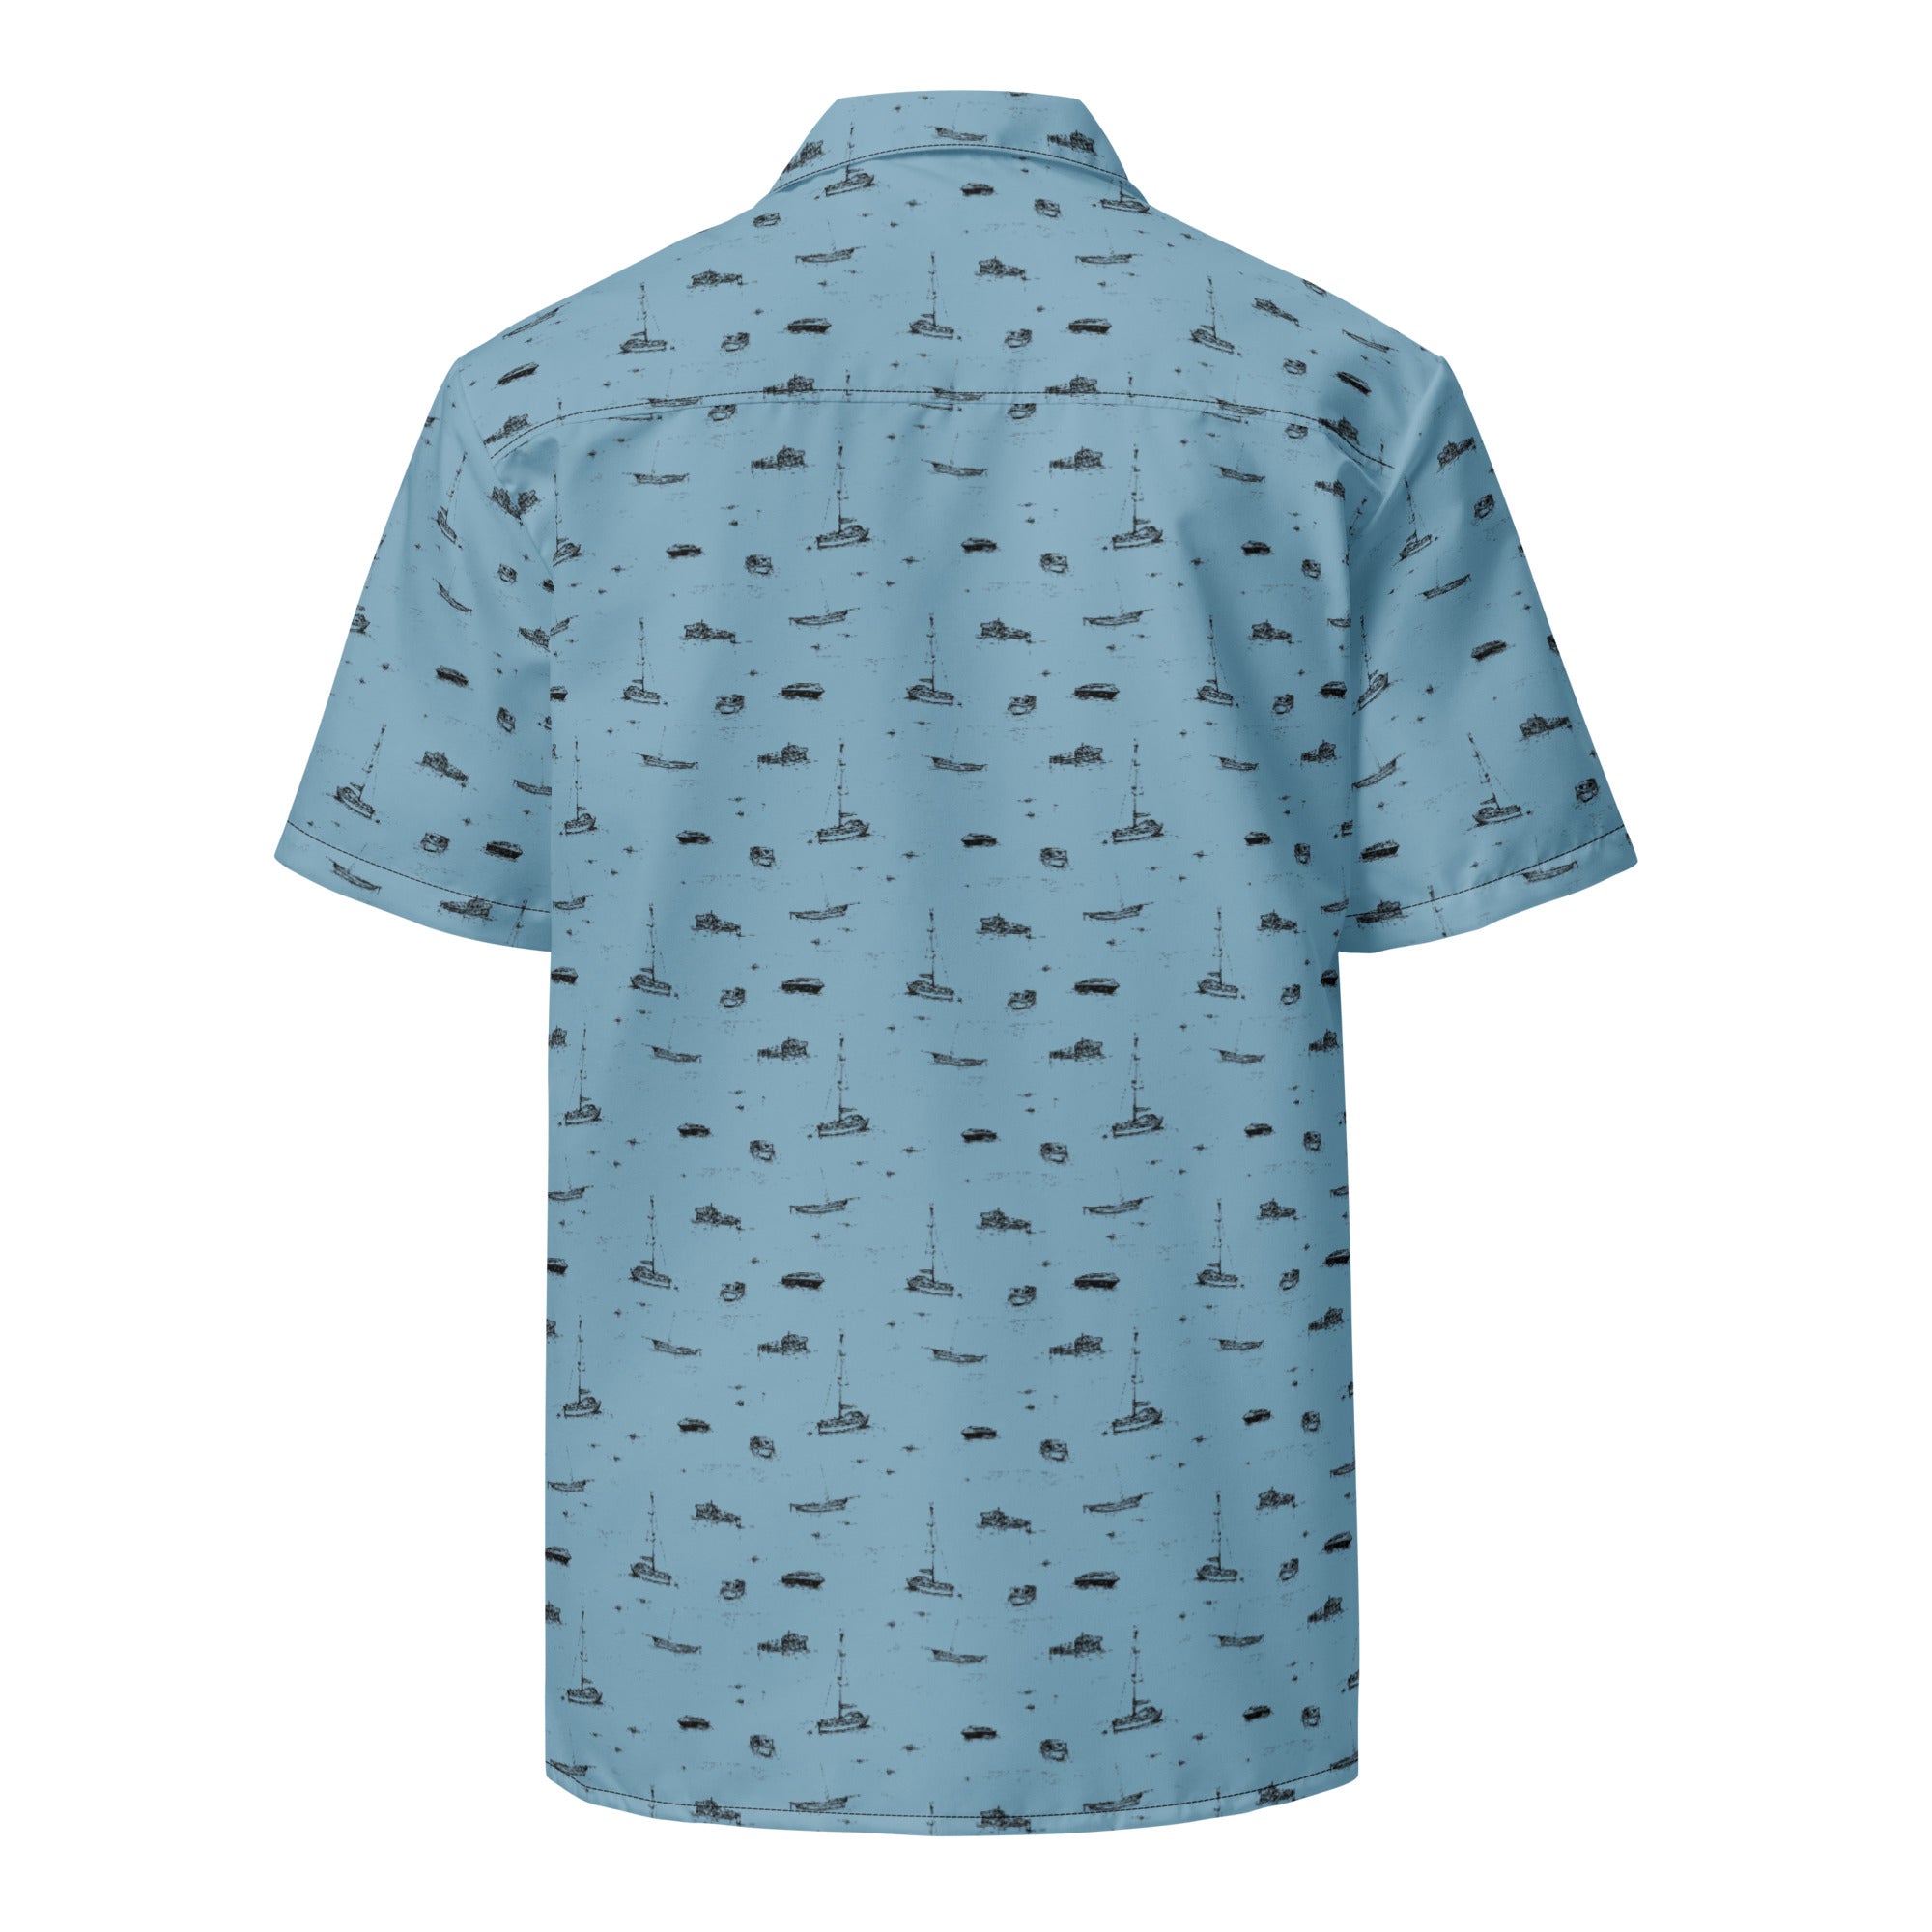 Boats on the Sea Button Up Shirt